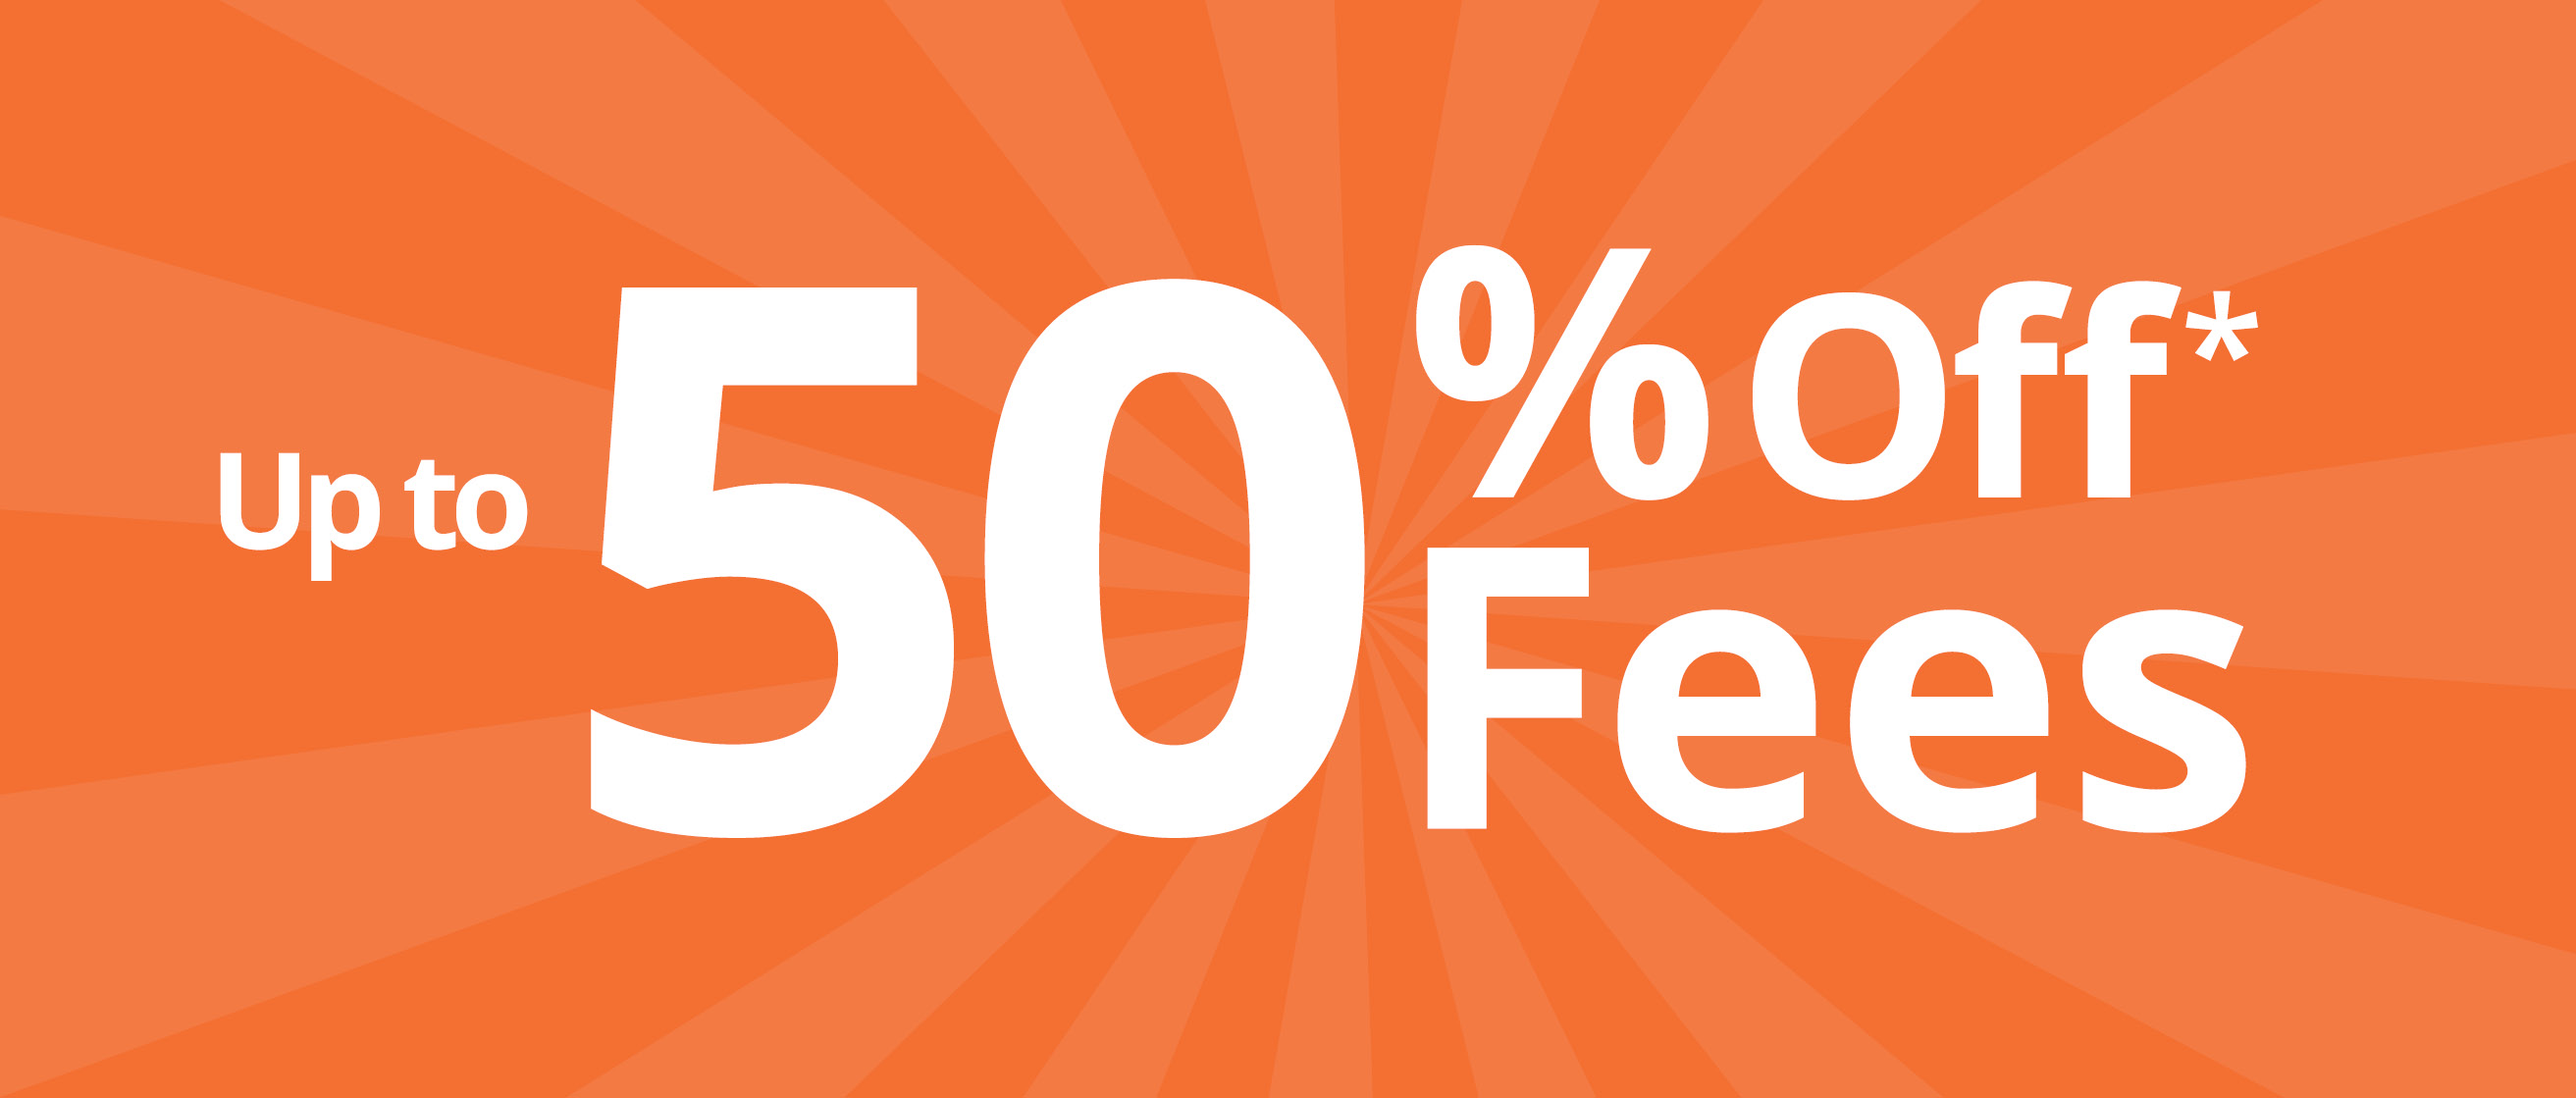 50 percent off fees phase 2 home page block